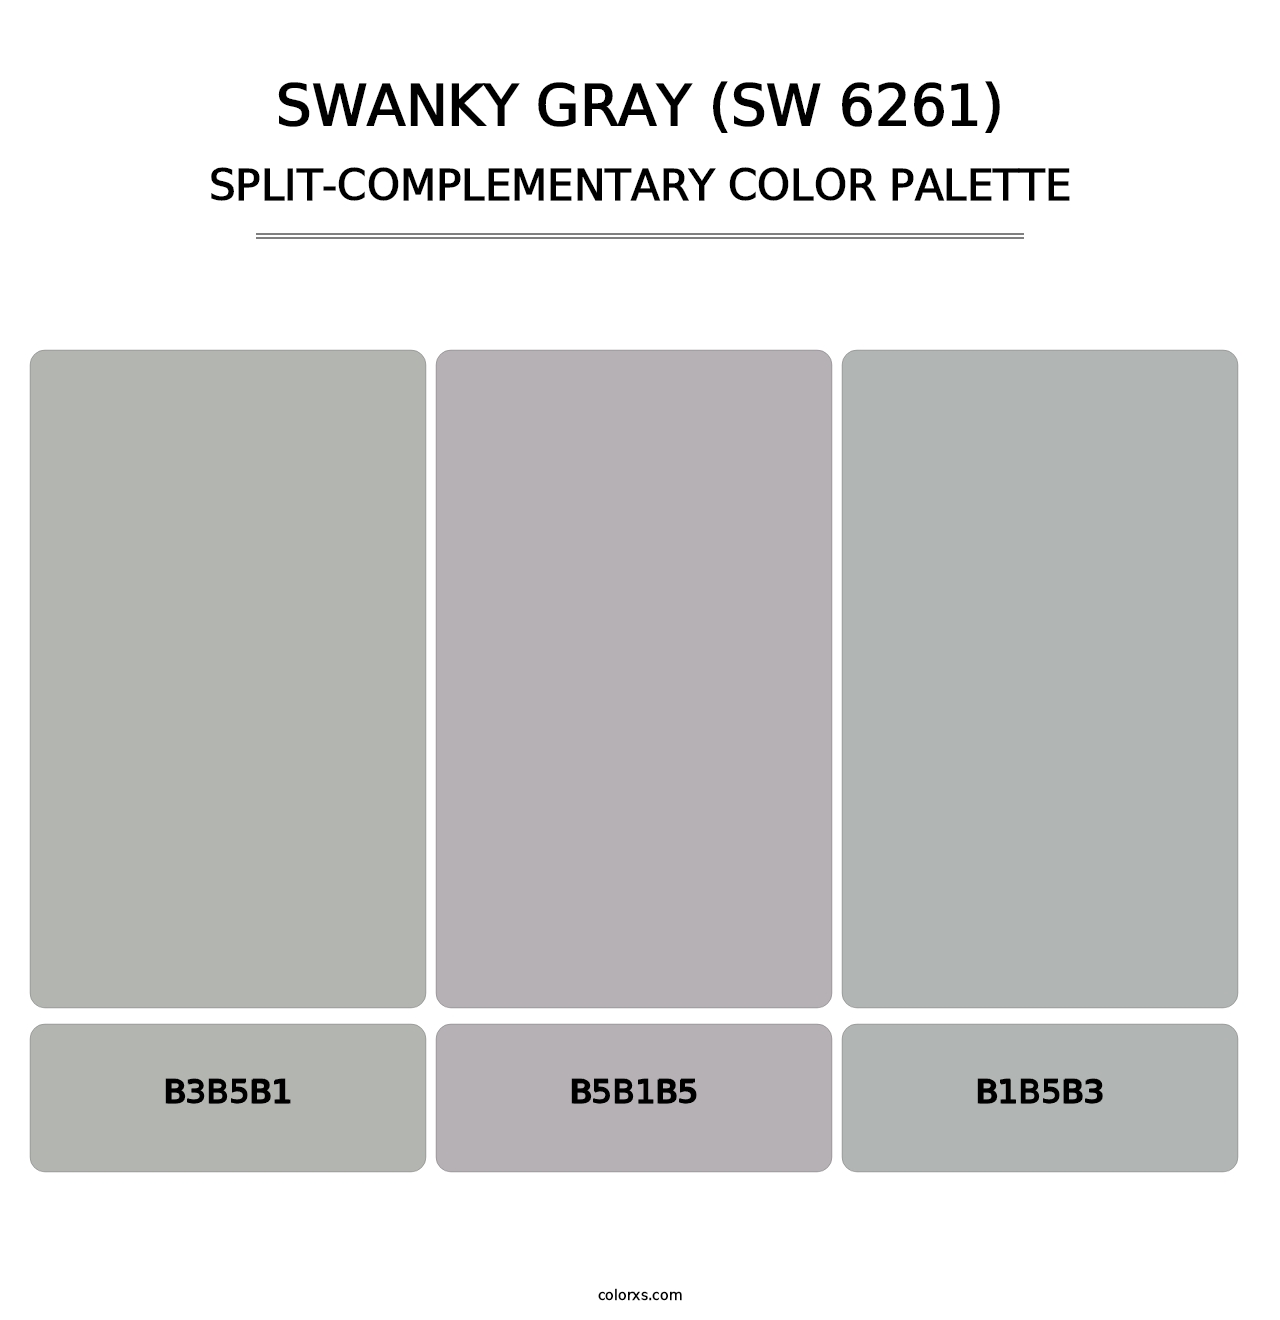 Swanky Gray (SW 6261) - Split-Complementary Color Palette